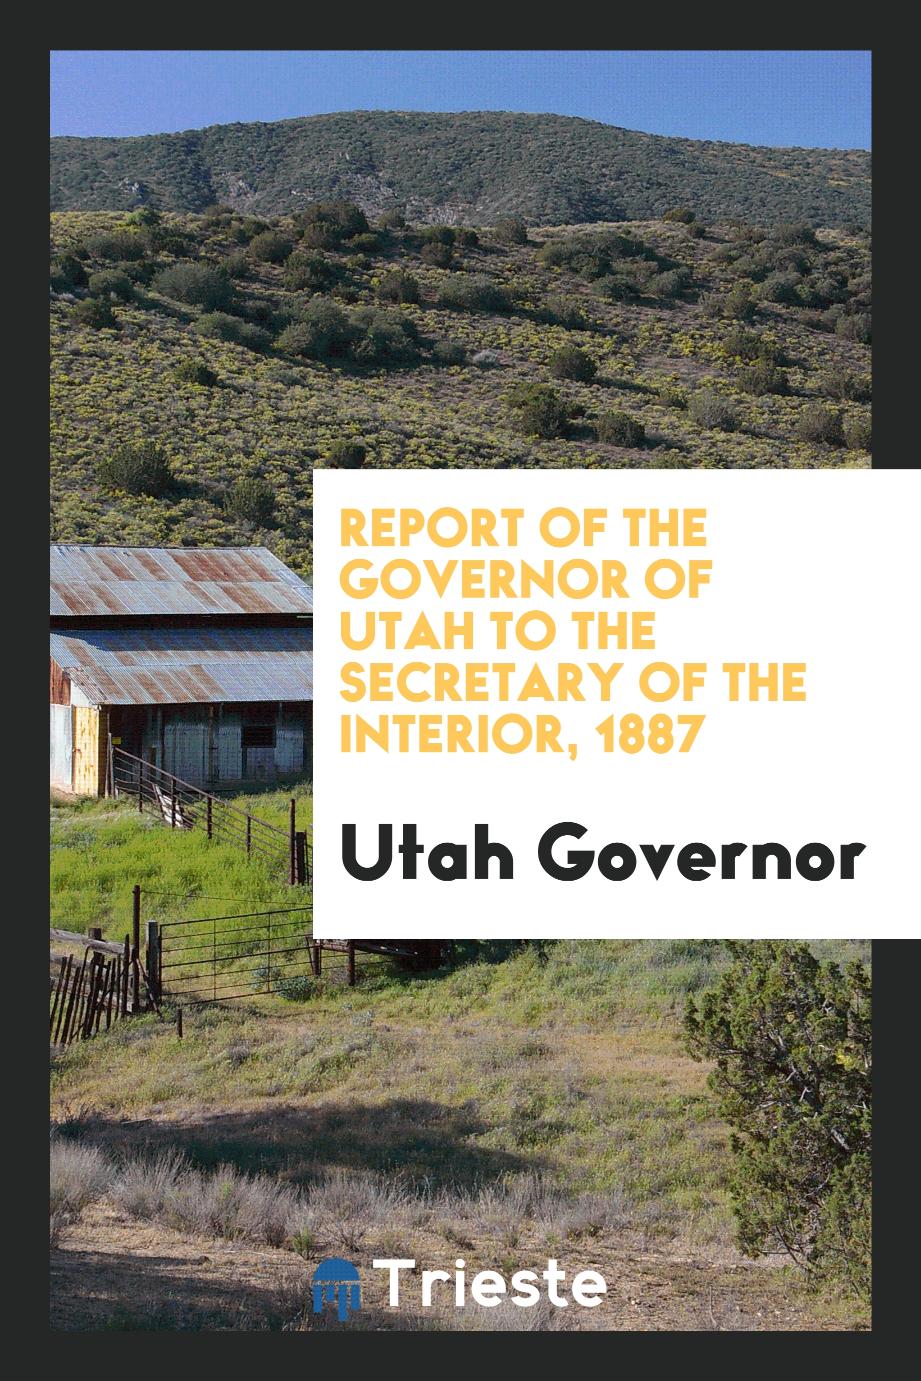 Report of the Governor of Utah to the Secretary of the Interior, 1887